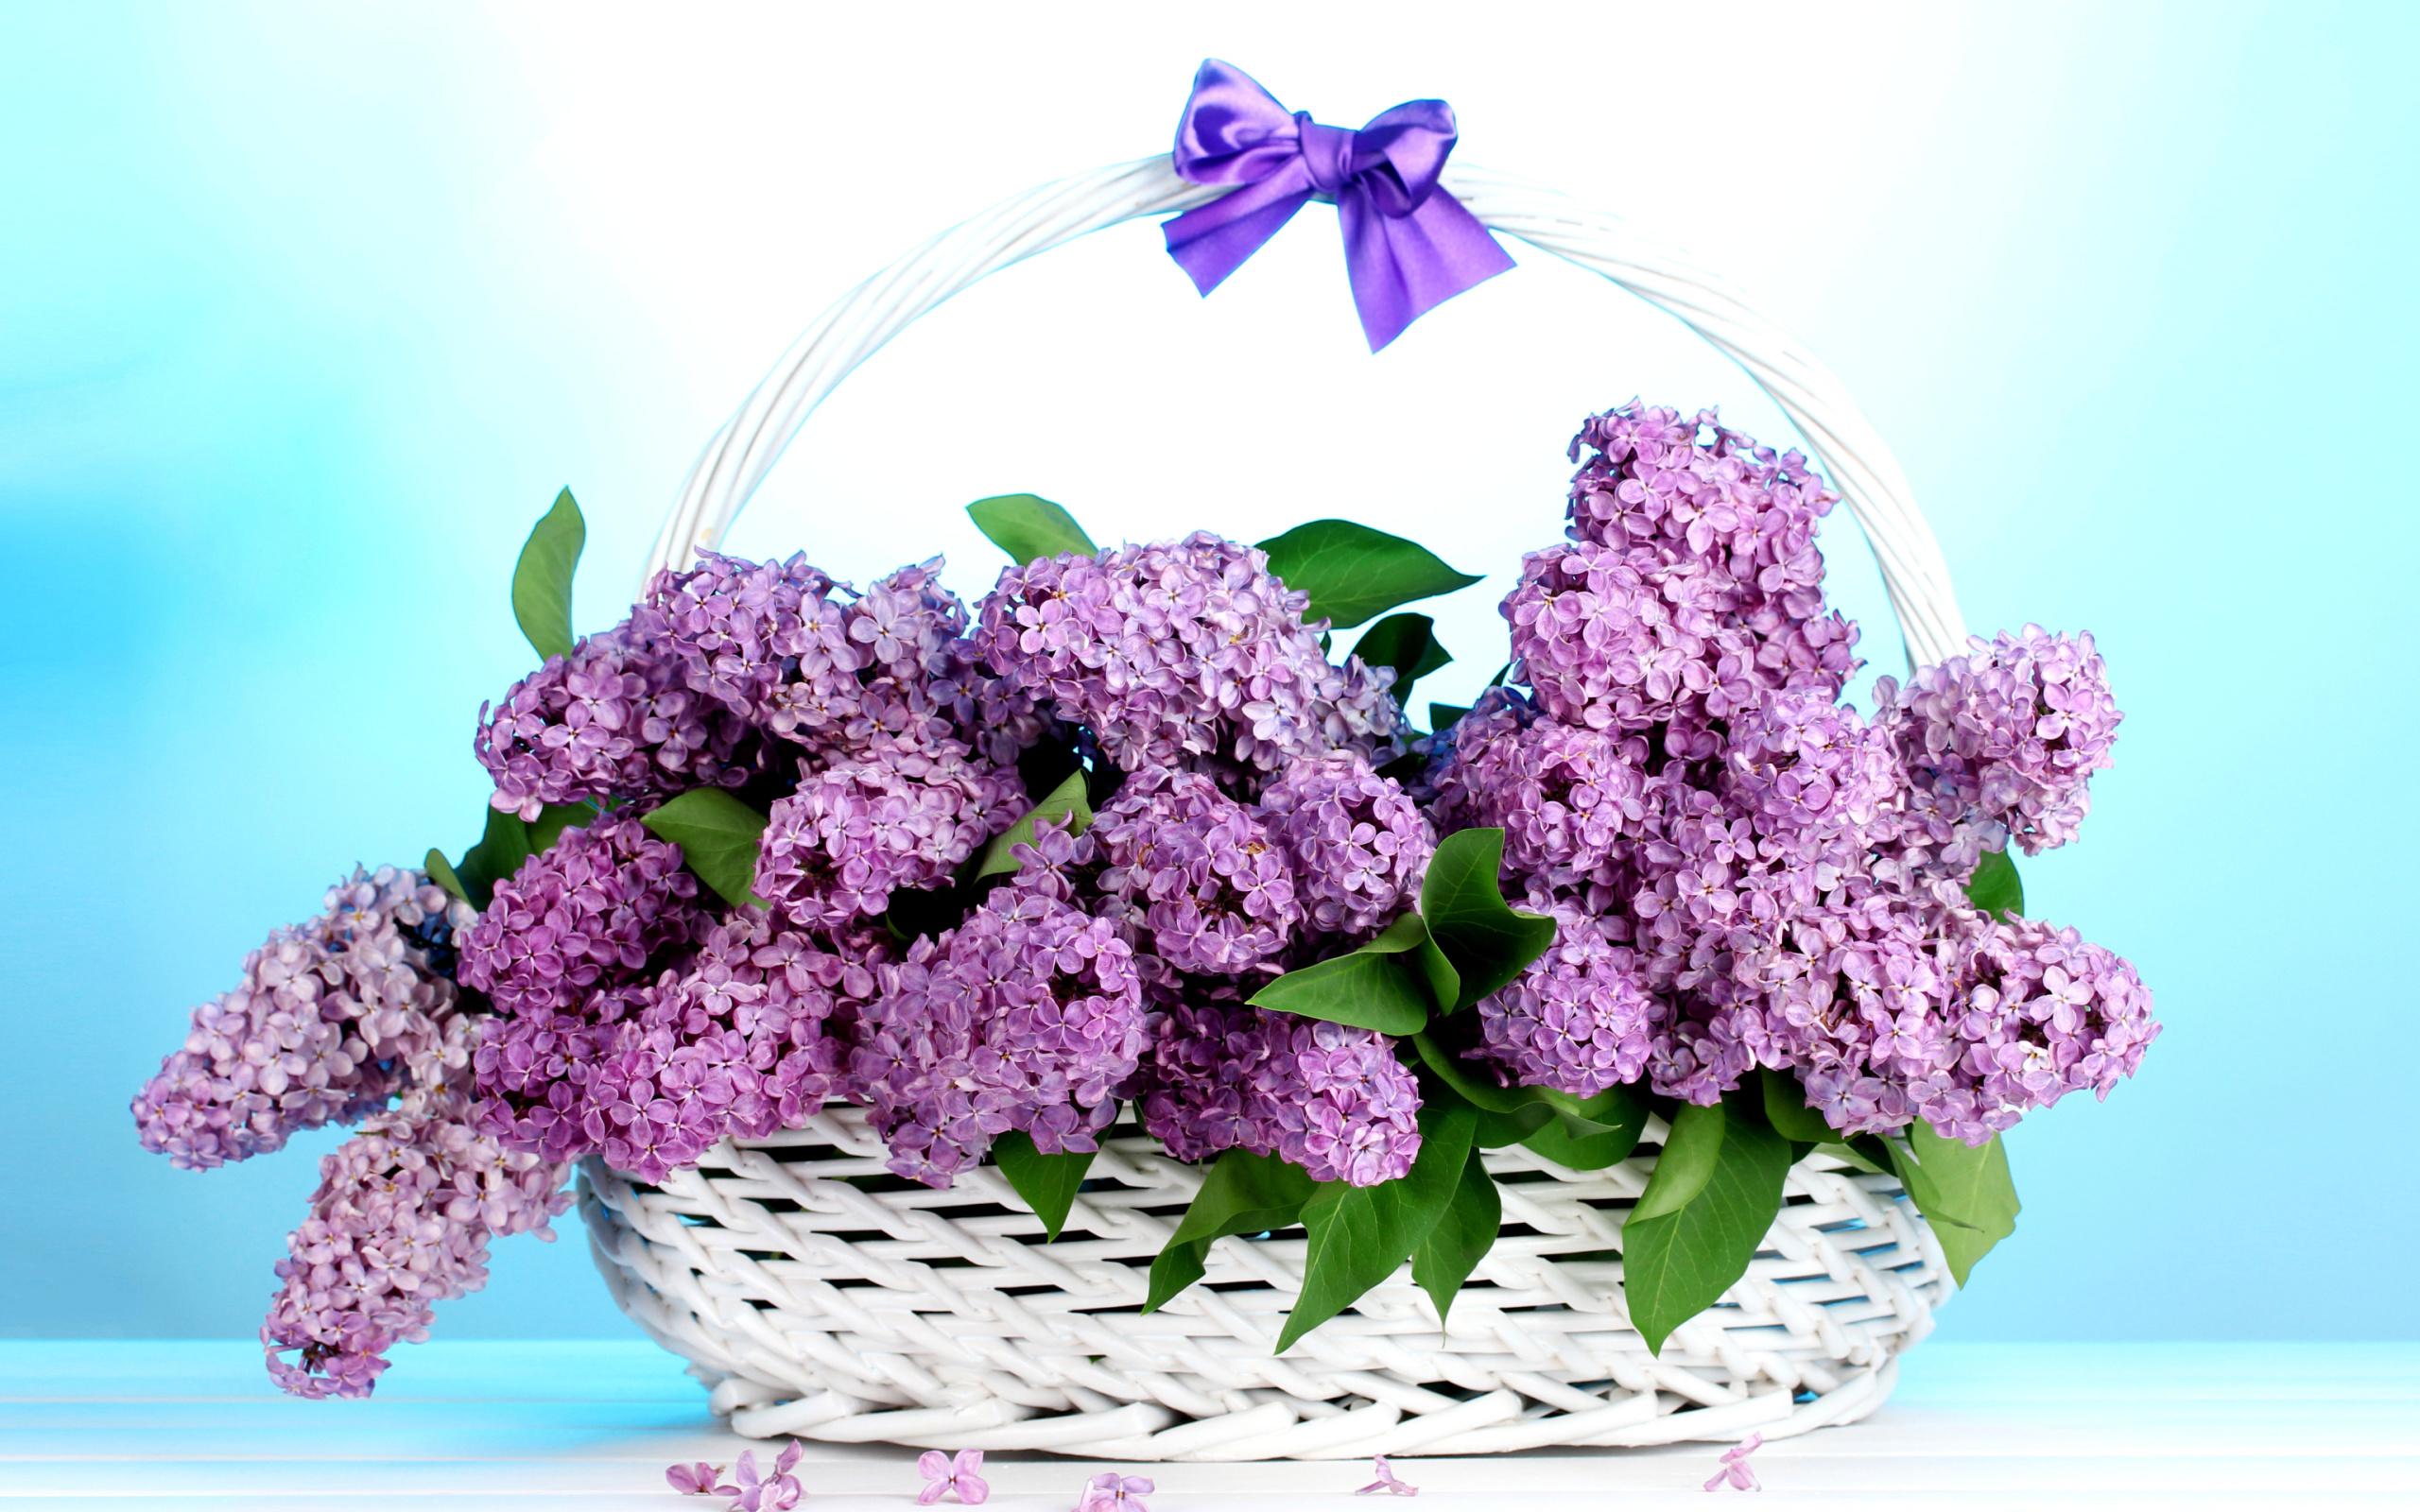 Das Baskets with lilac flowers Wallpaper 2560x1600